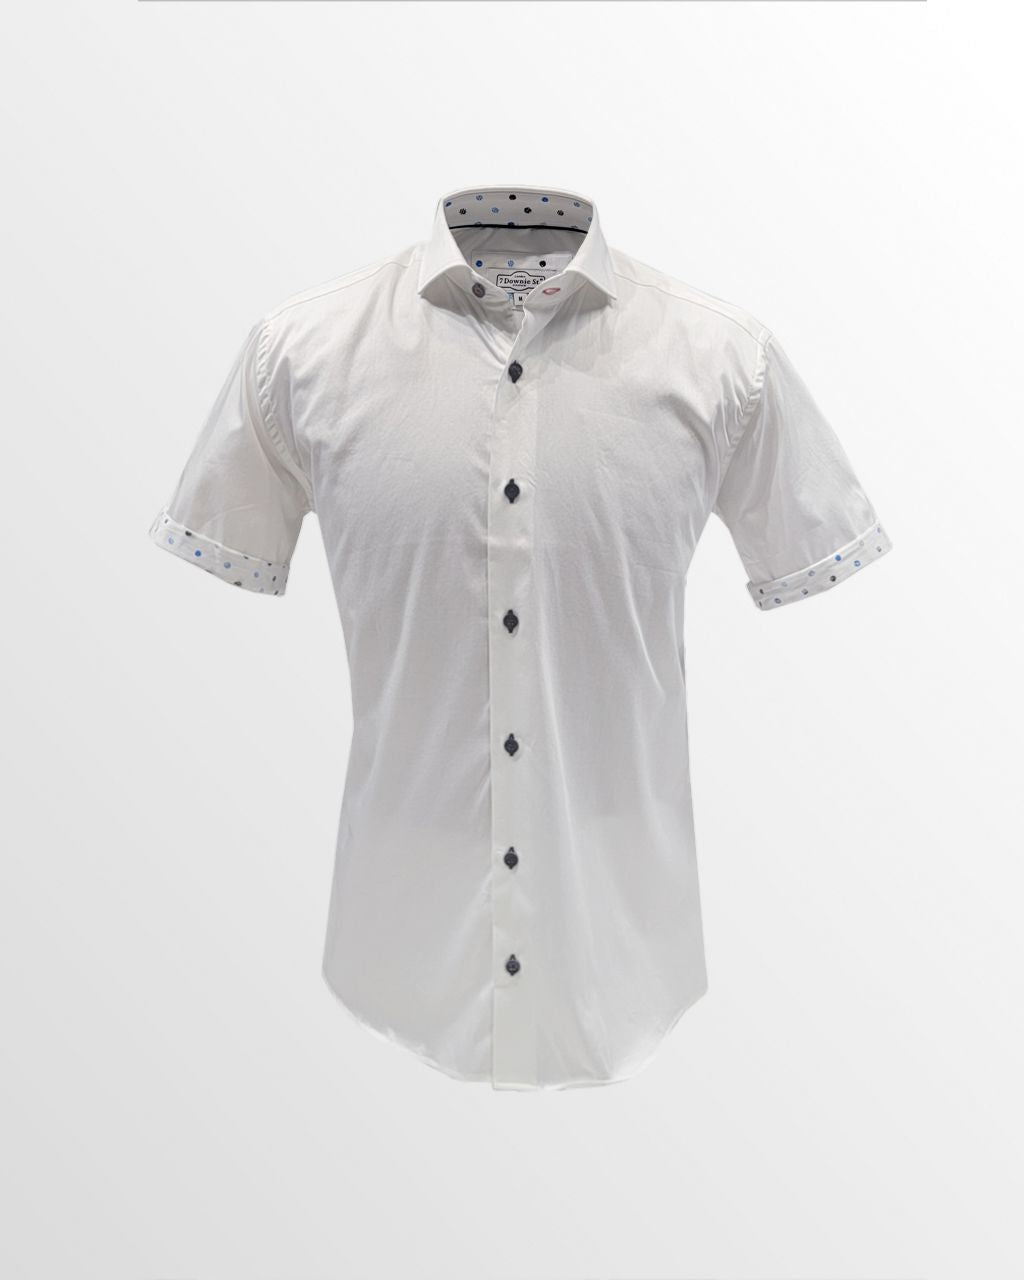 7 Downie St. Short Sleeve Sport Shirt in Solid White with Blue Contrast